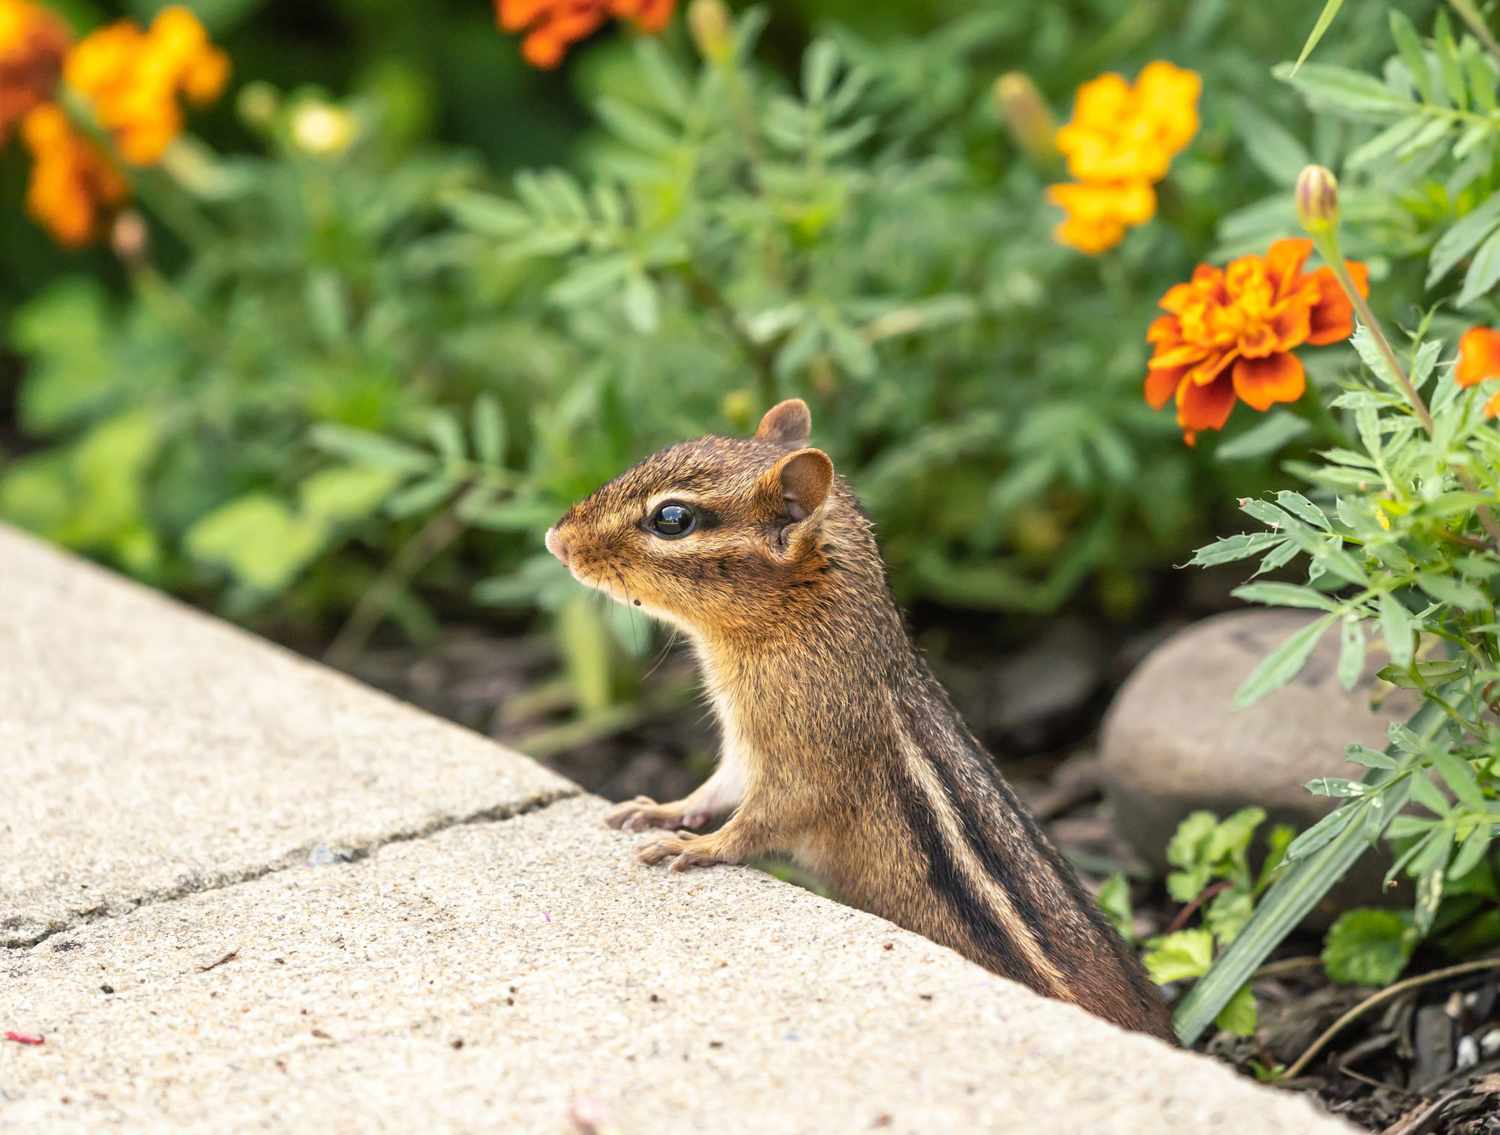 How To Get Rid Of A Chipmunk Under Your Porch